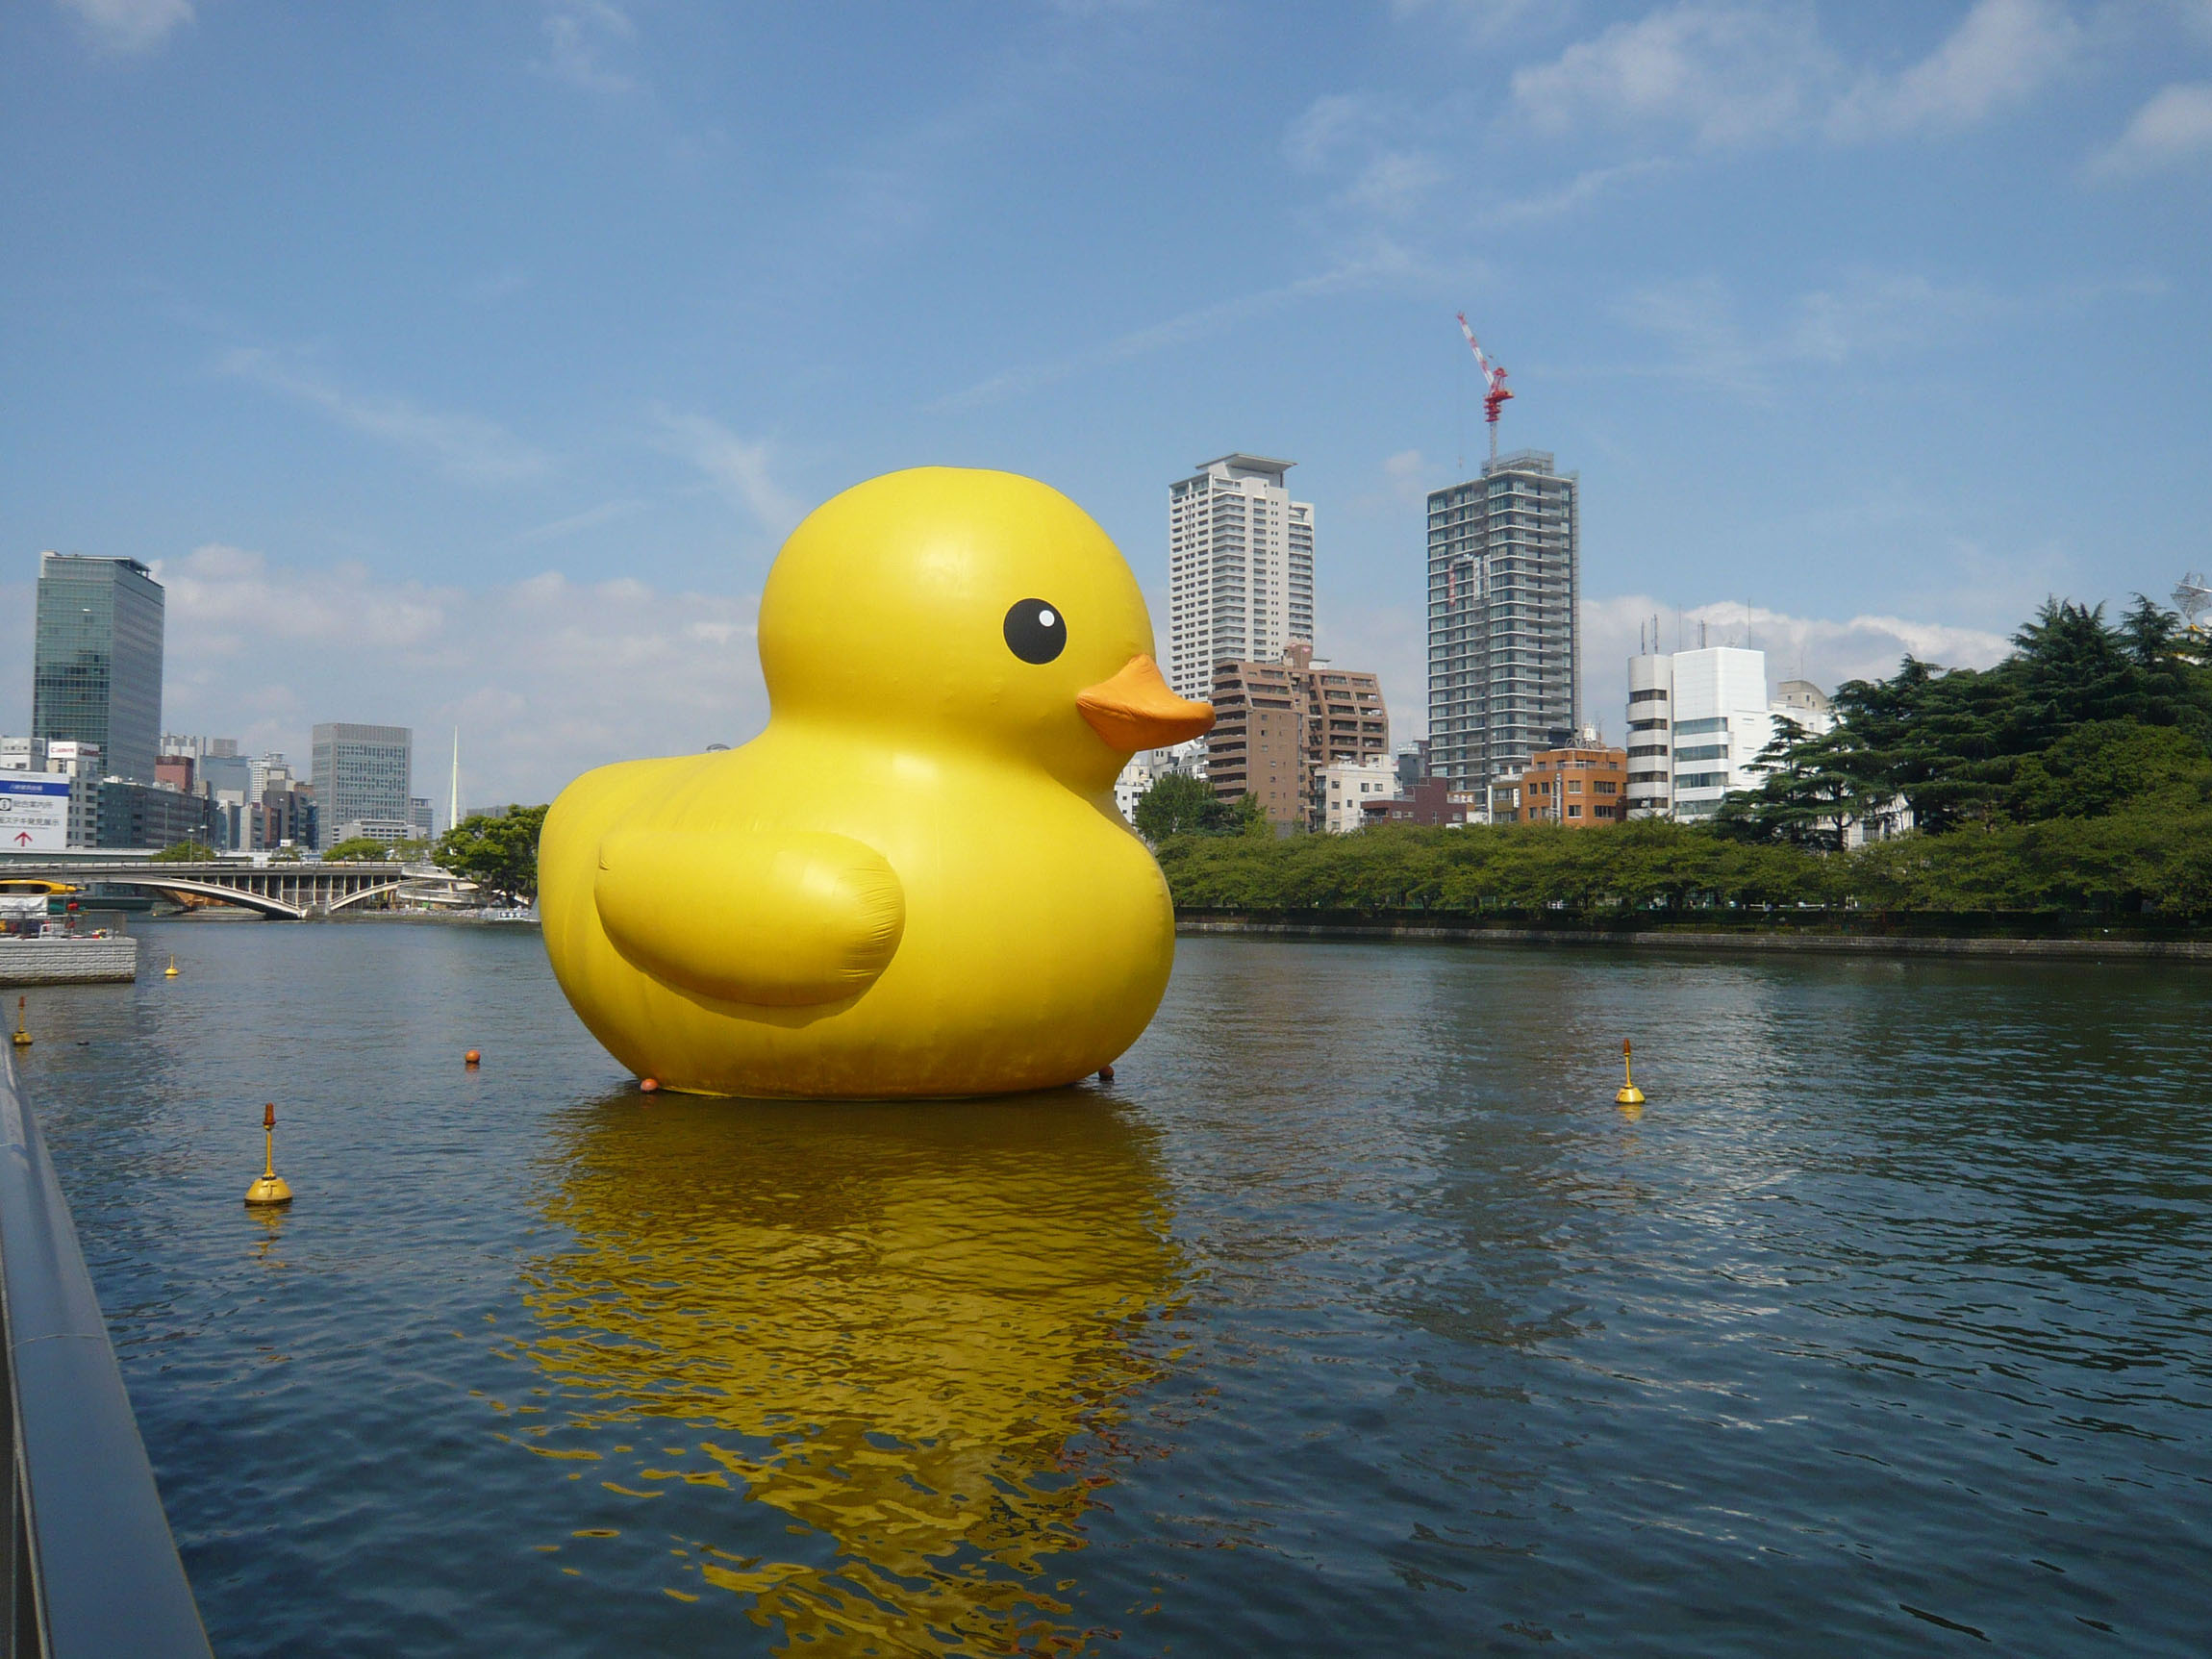 Giant duck to make its return | The Japan Times